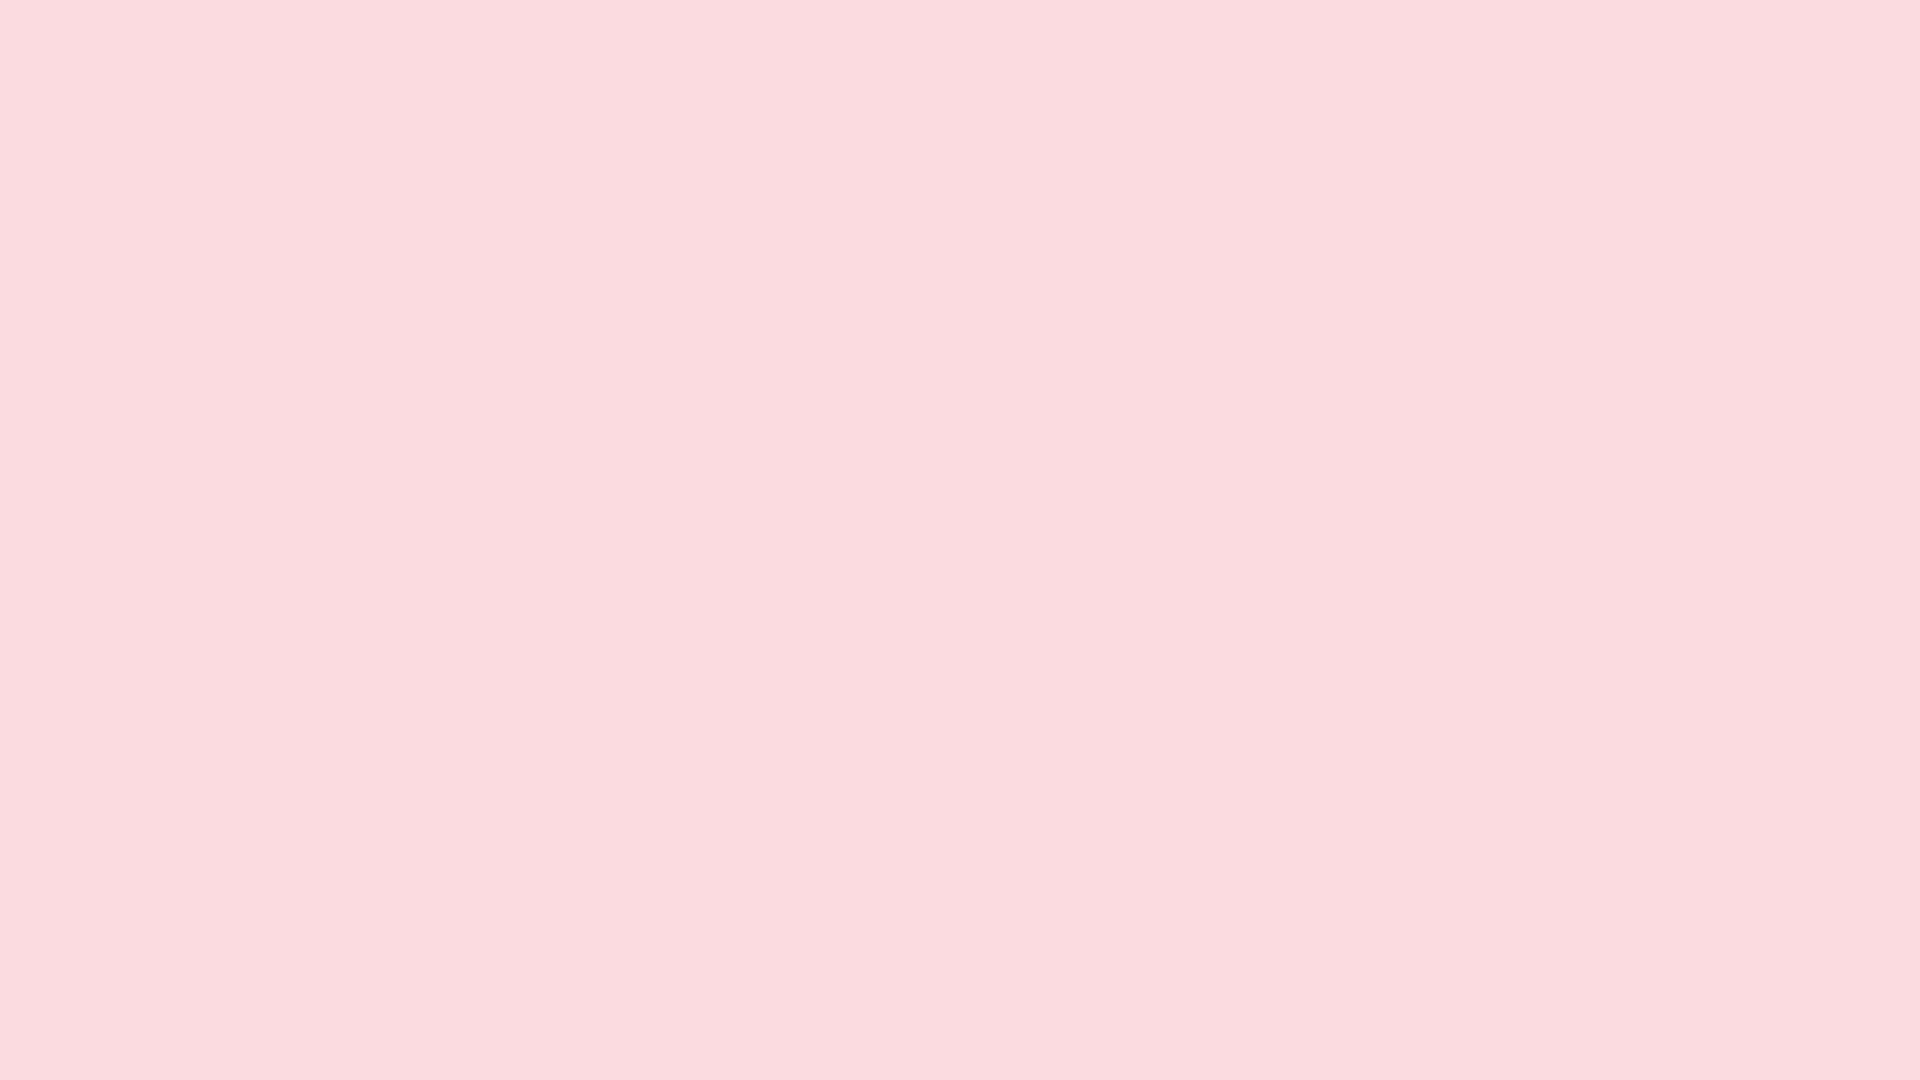 Soft Pink Background - Warm and Inviting